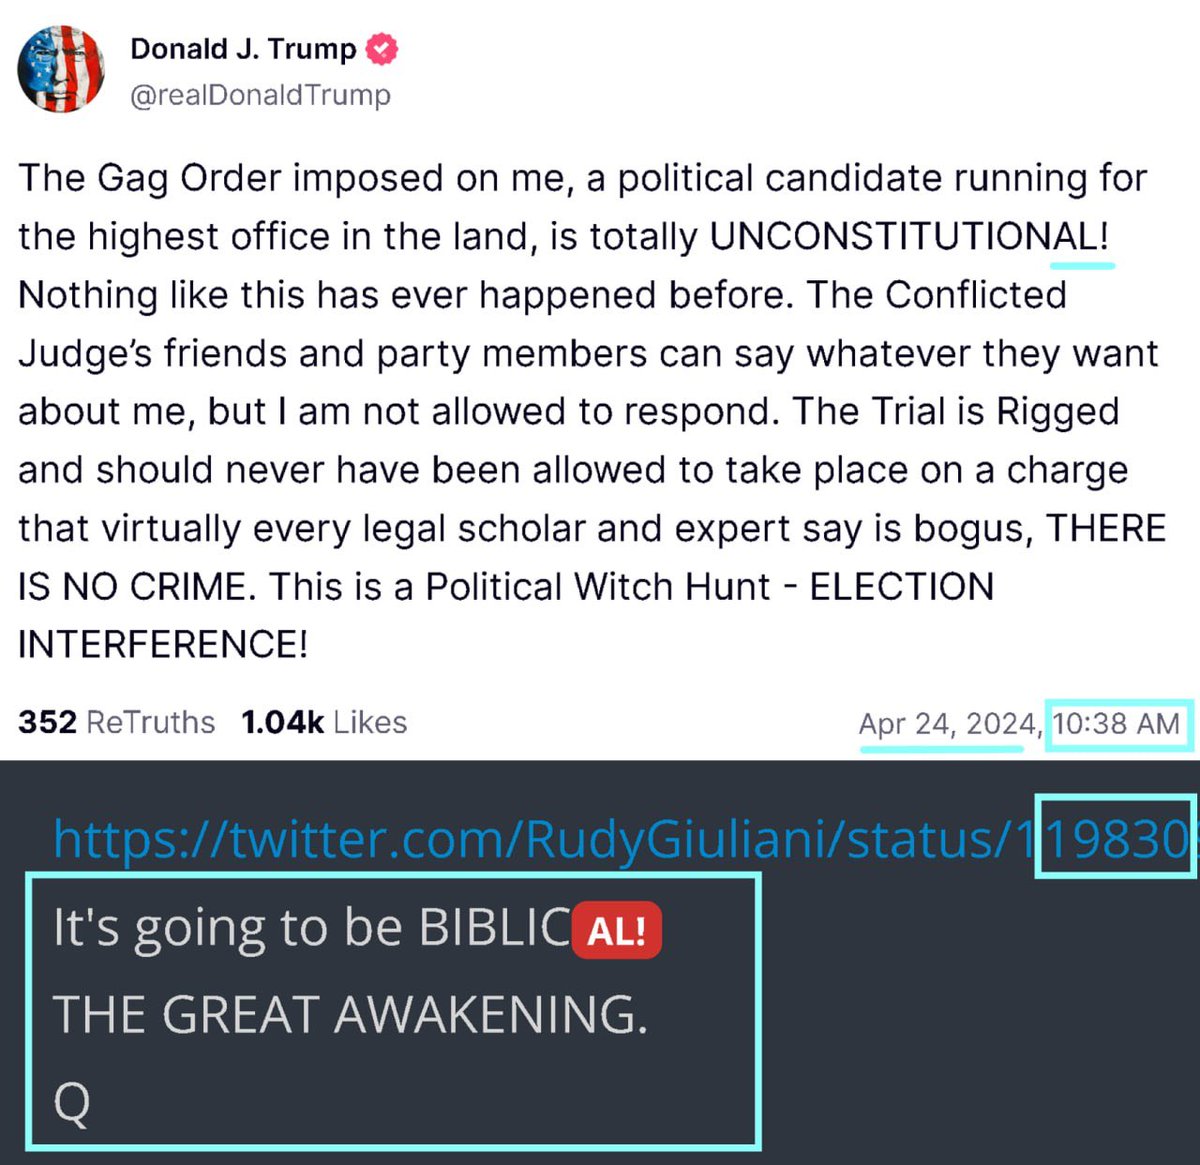 TRUMP –  POTUS isolates this drop (+1) – 1038 string is interrupted with a 9??

It's going to be BIBLICAL! 
THE GREAT AWAKENING.
Q